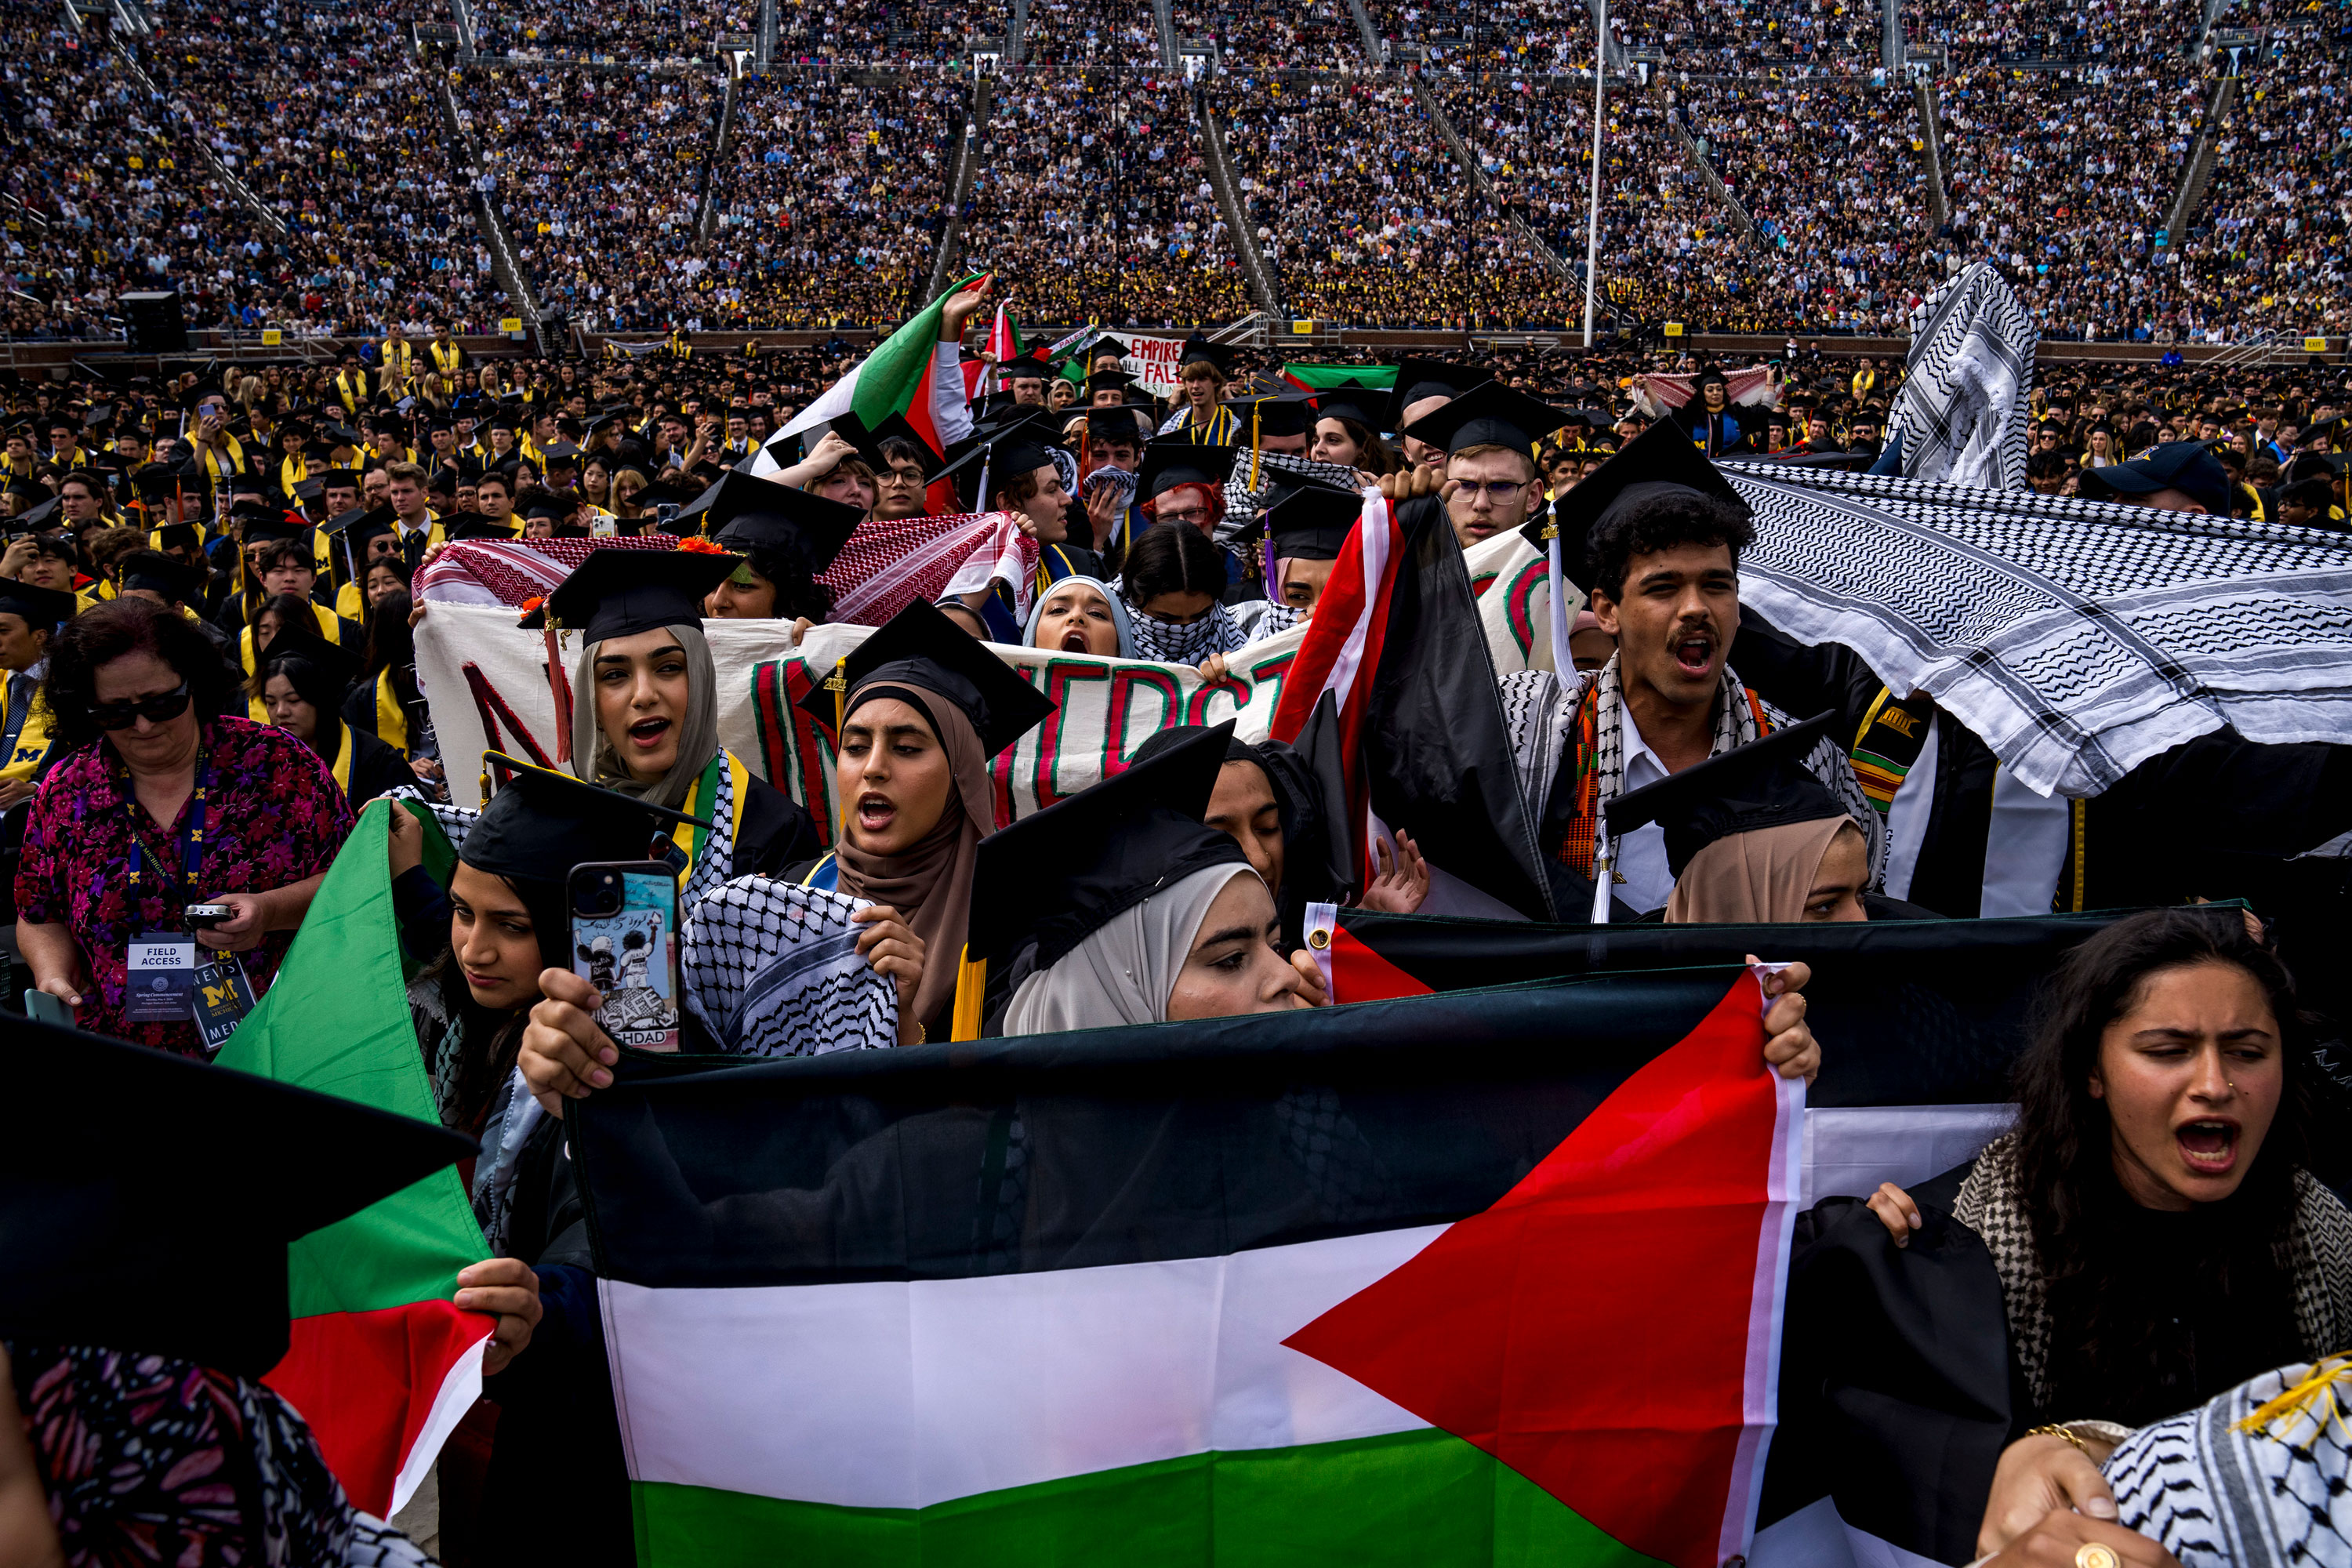 Students demonstrate during a pro-Palestinian protest during the University of Michigan's spring commencement ceremony in Ann Arbor, Michigan, on May 4. Nic Antaya/Getty Images